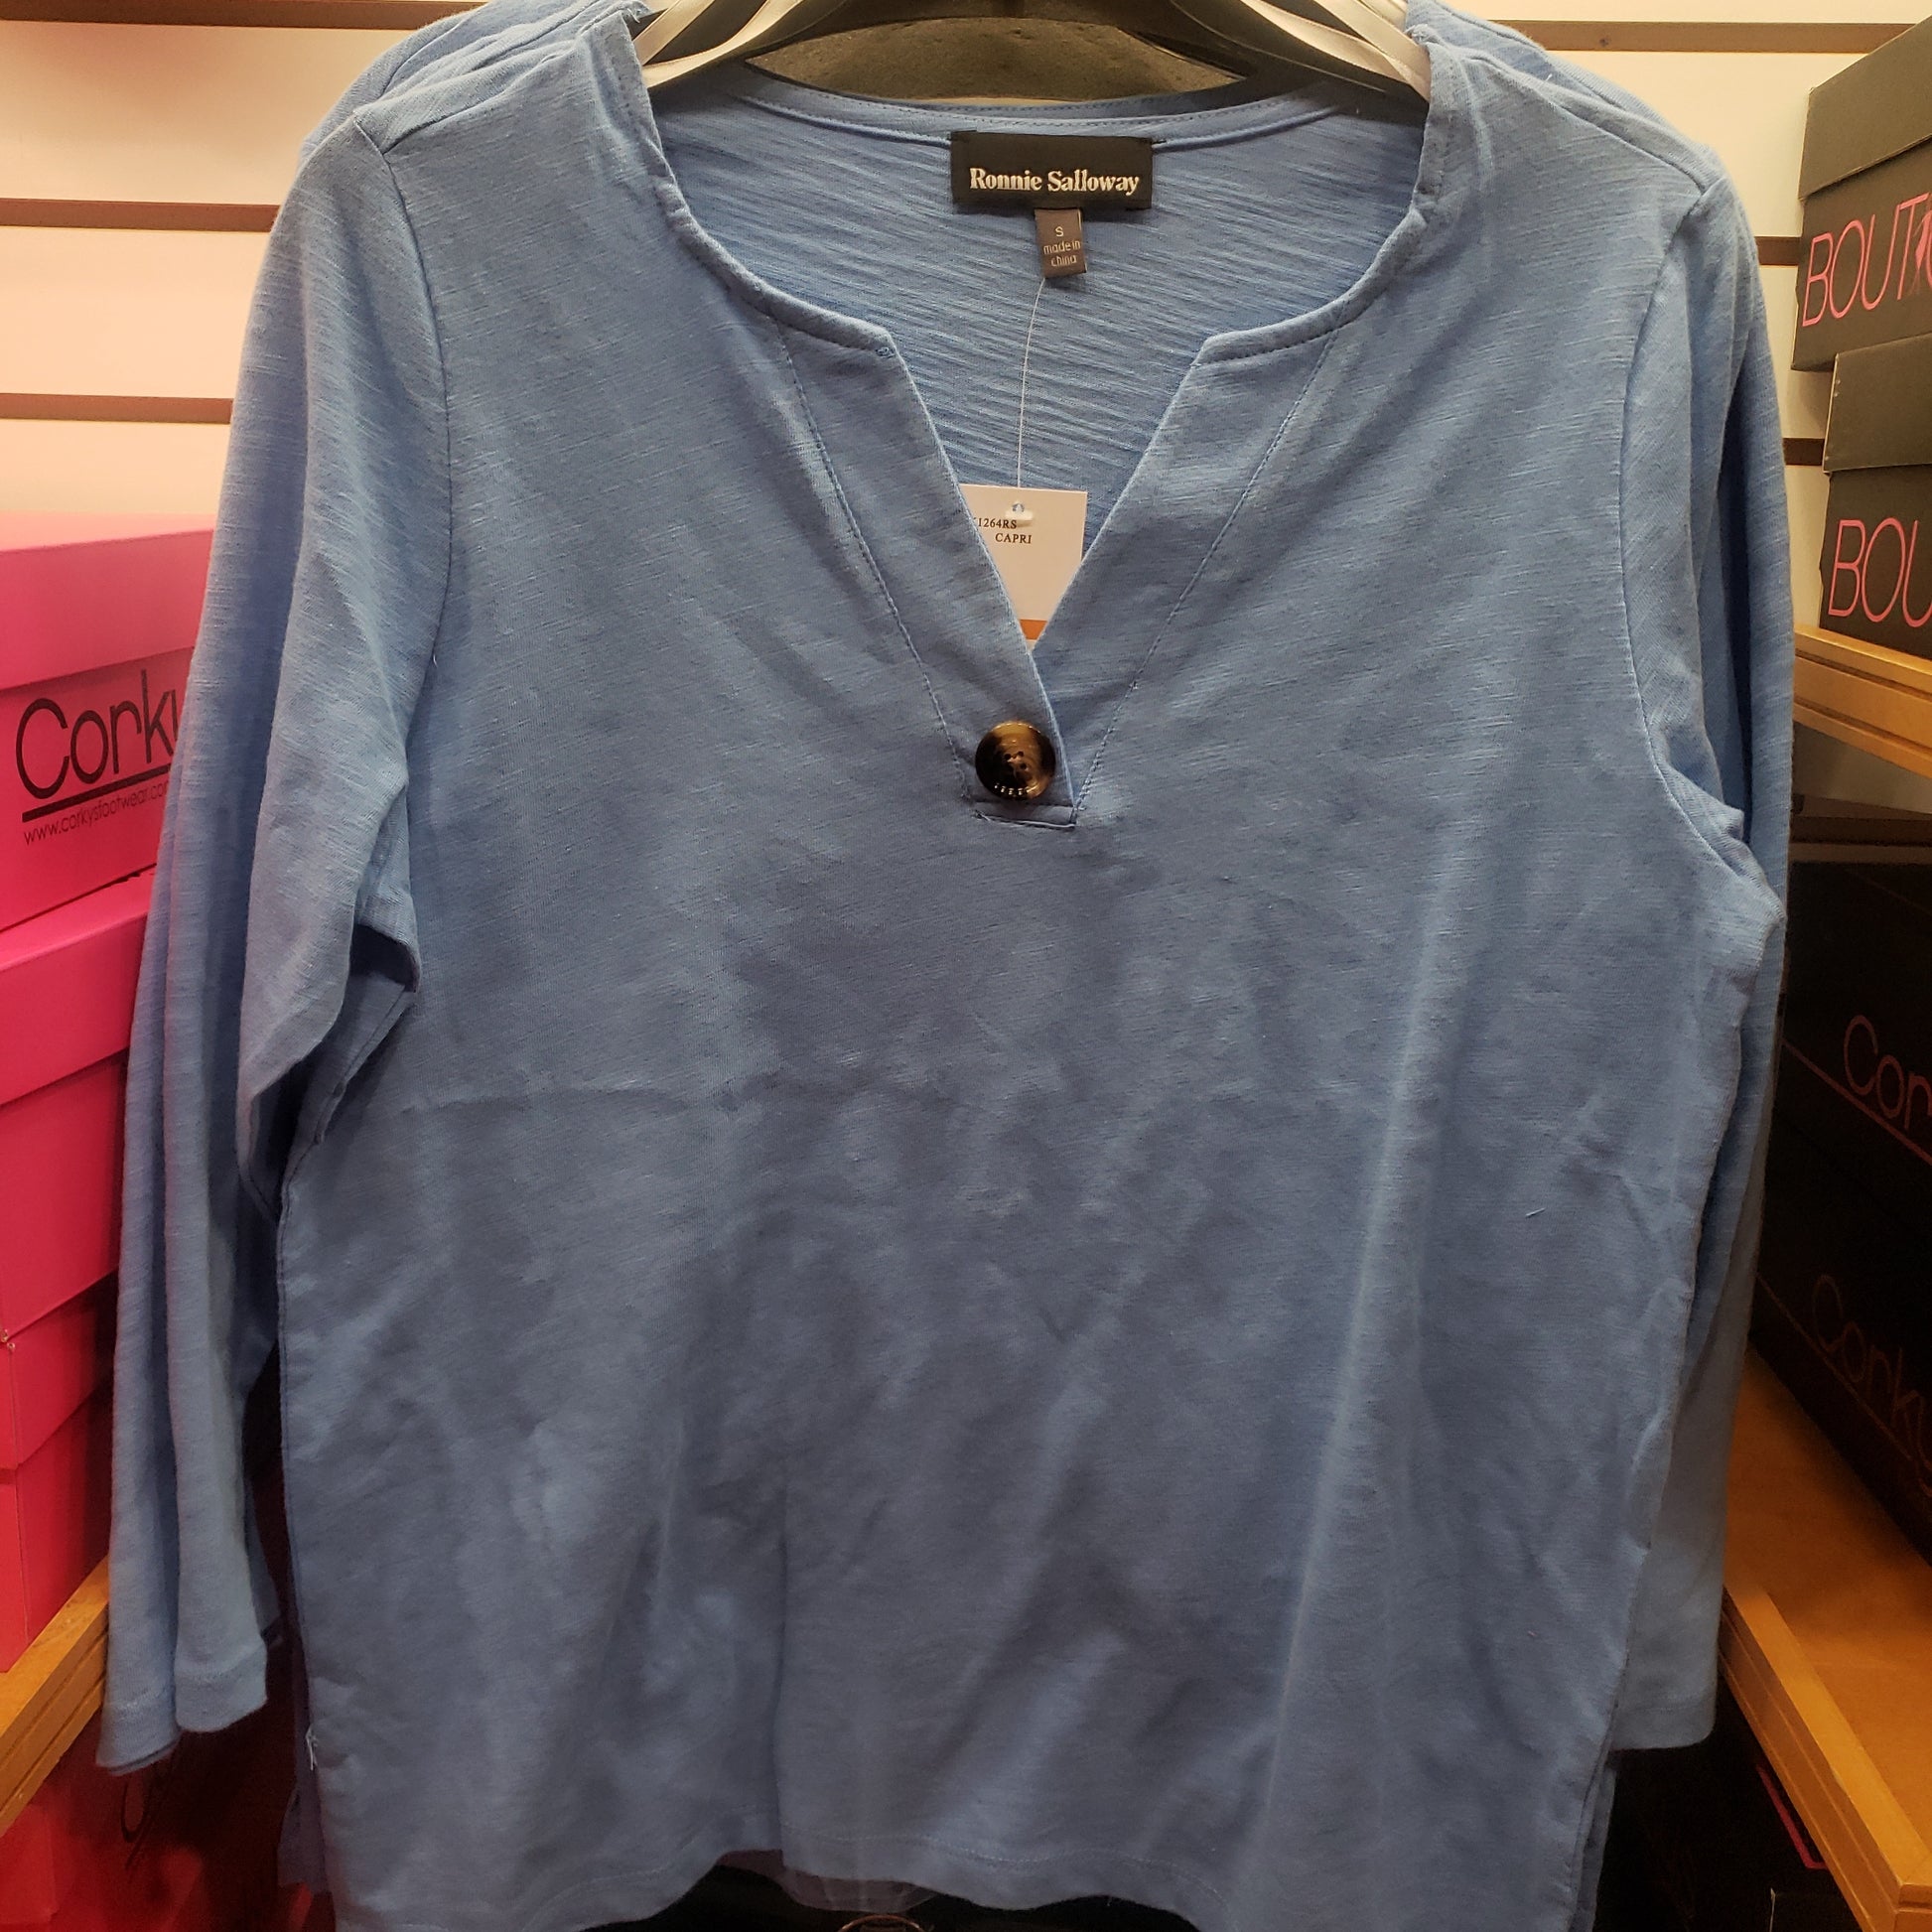 A 3/4 Sleeve Wood Button Accent Cotton Top in Sky Blue by RONNIE SALLOWAY & CO INC hangs on a store rack. Multiple shoeboxes are visible in the background.